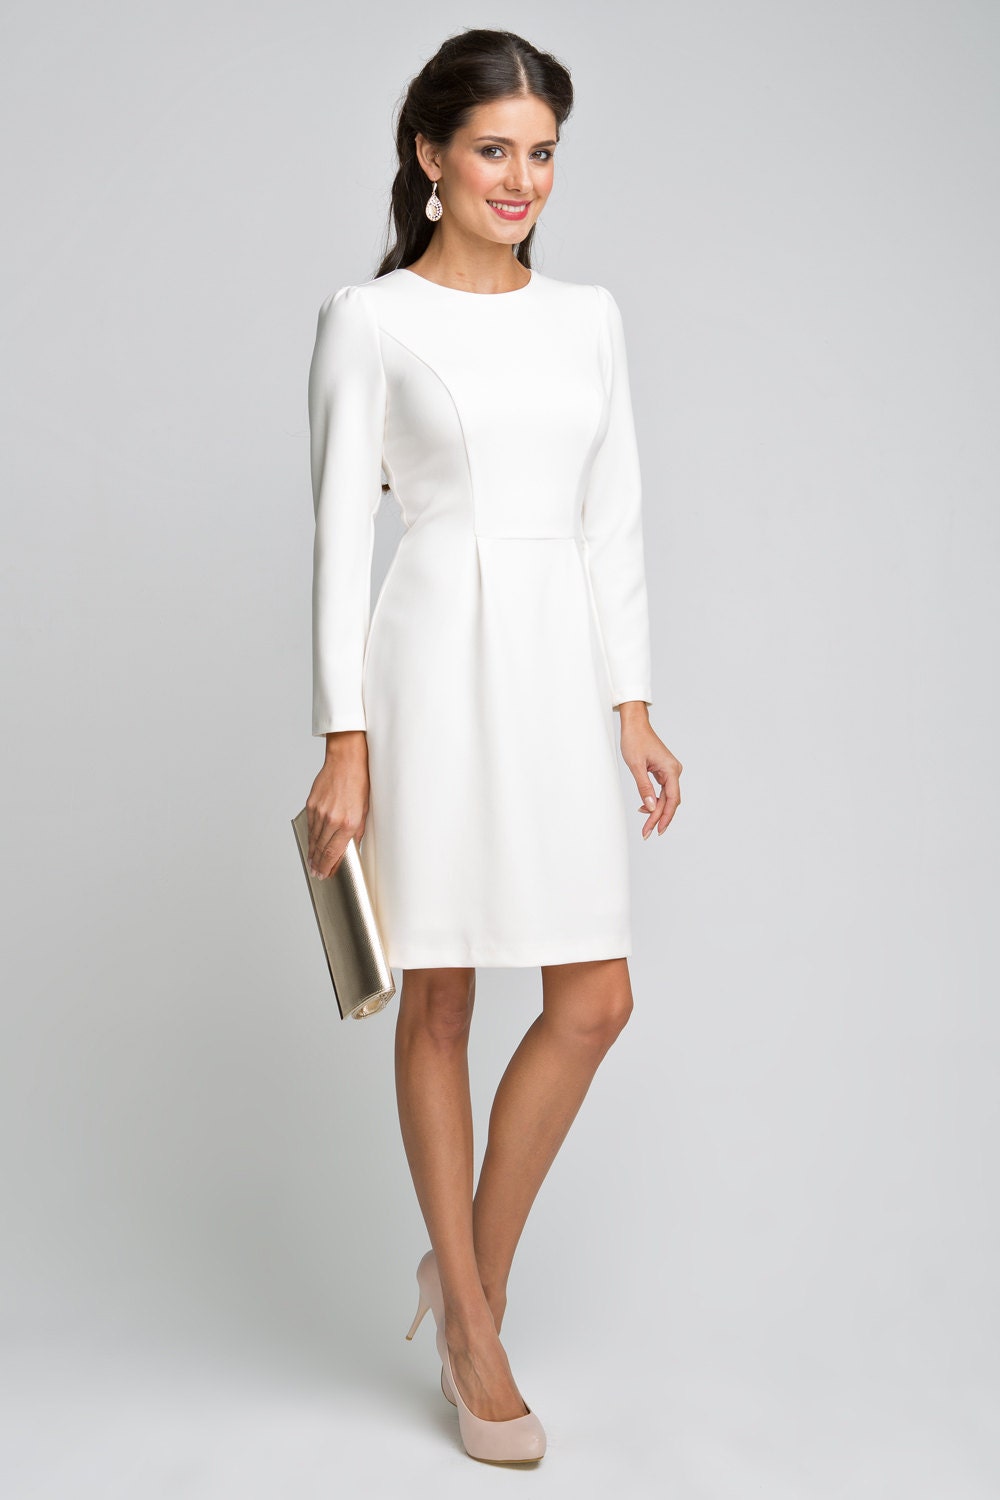 Occasion White Dress Bodycon . Simple Straight Dress Work.Long